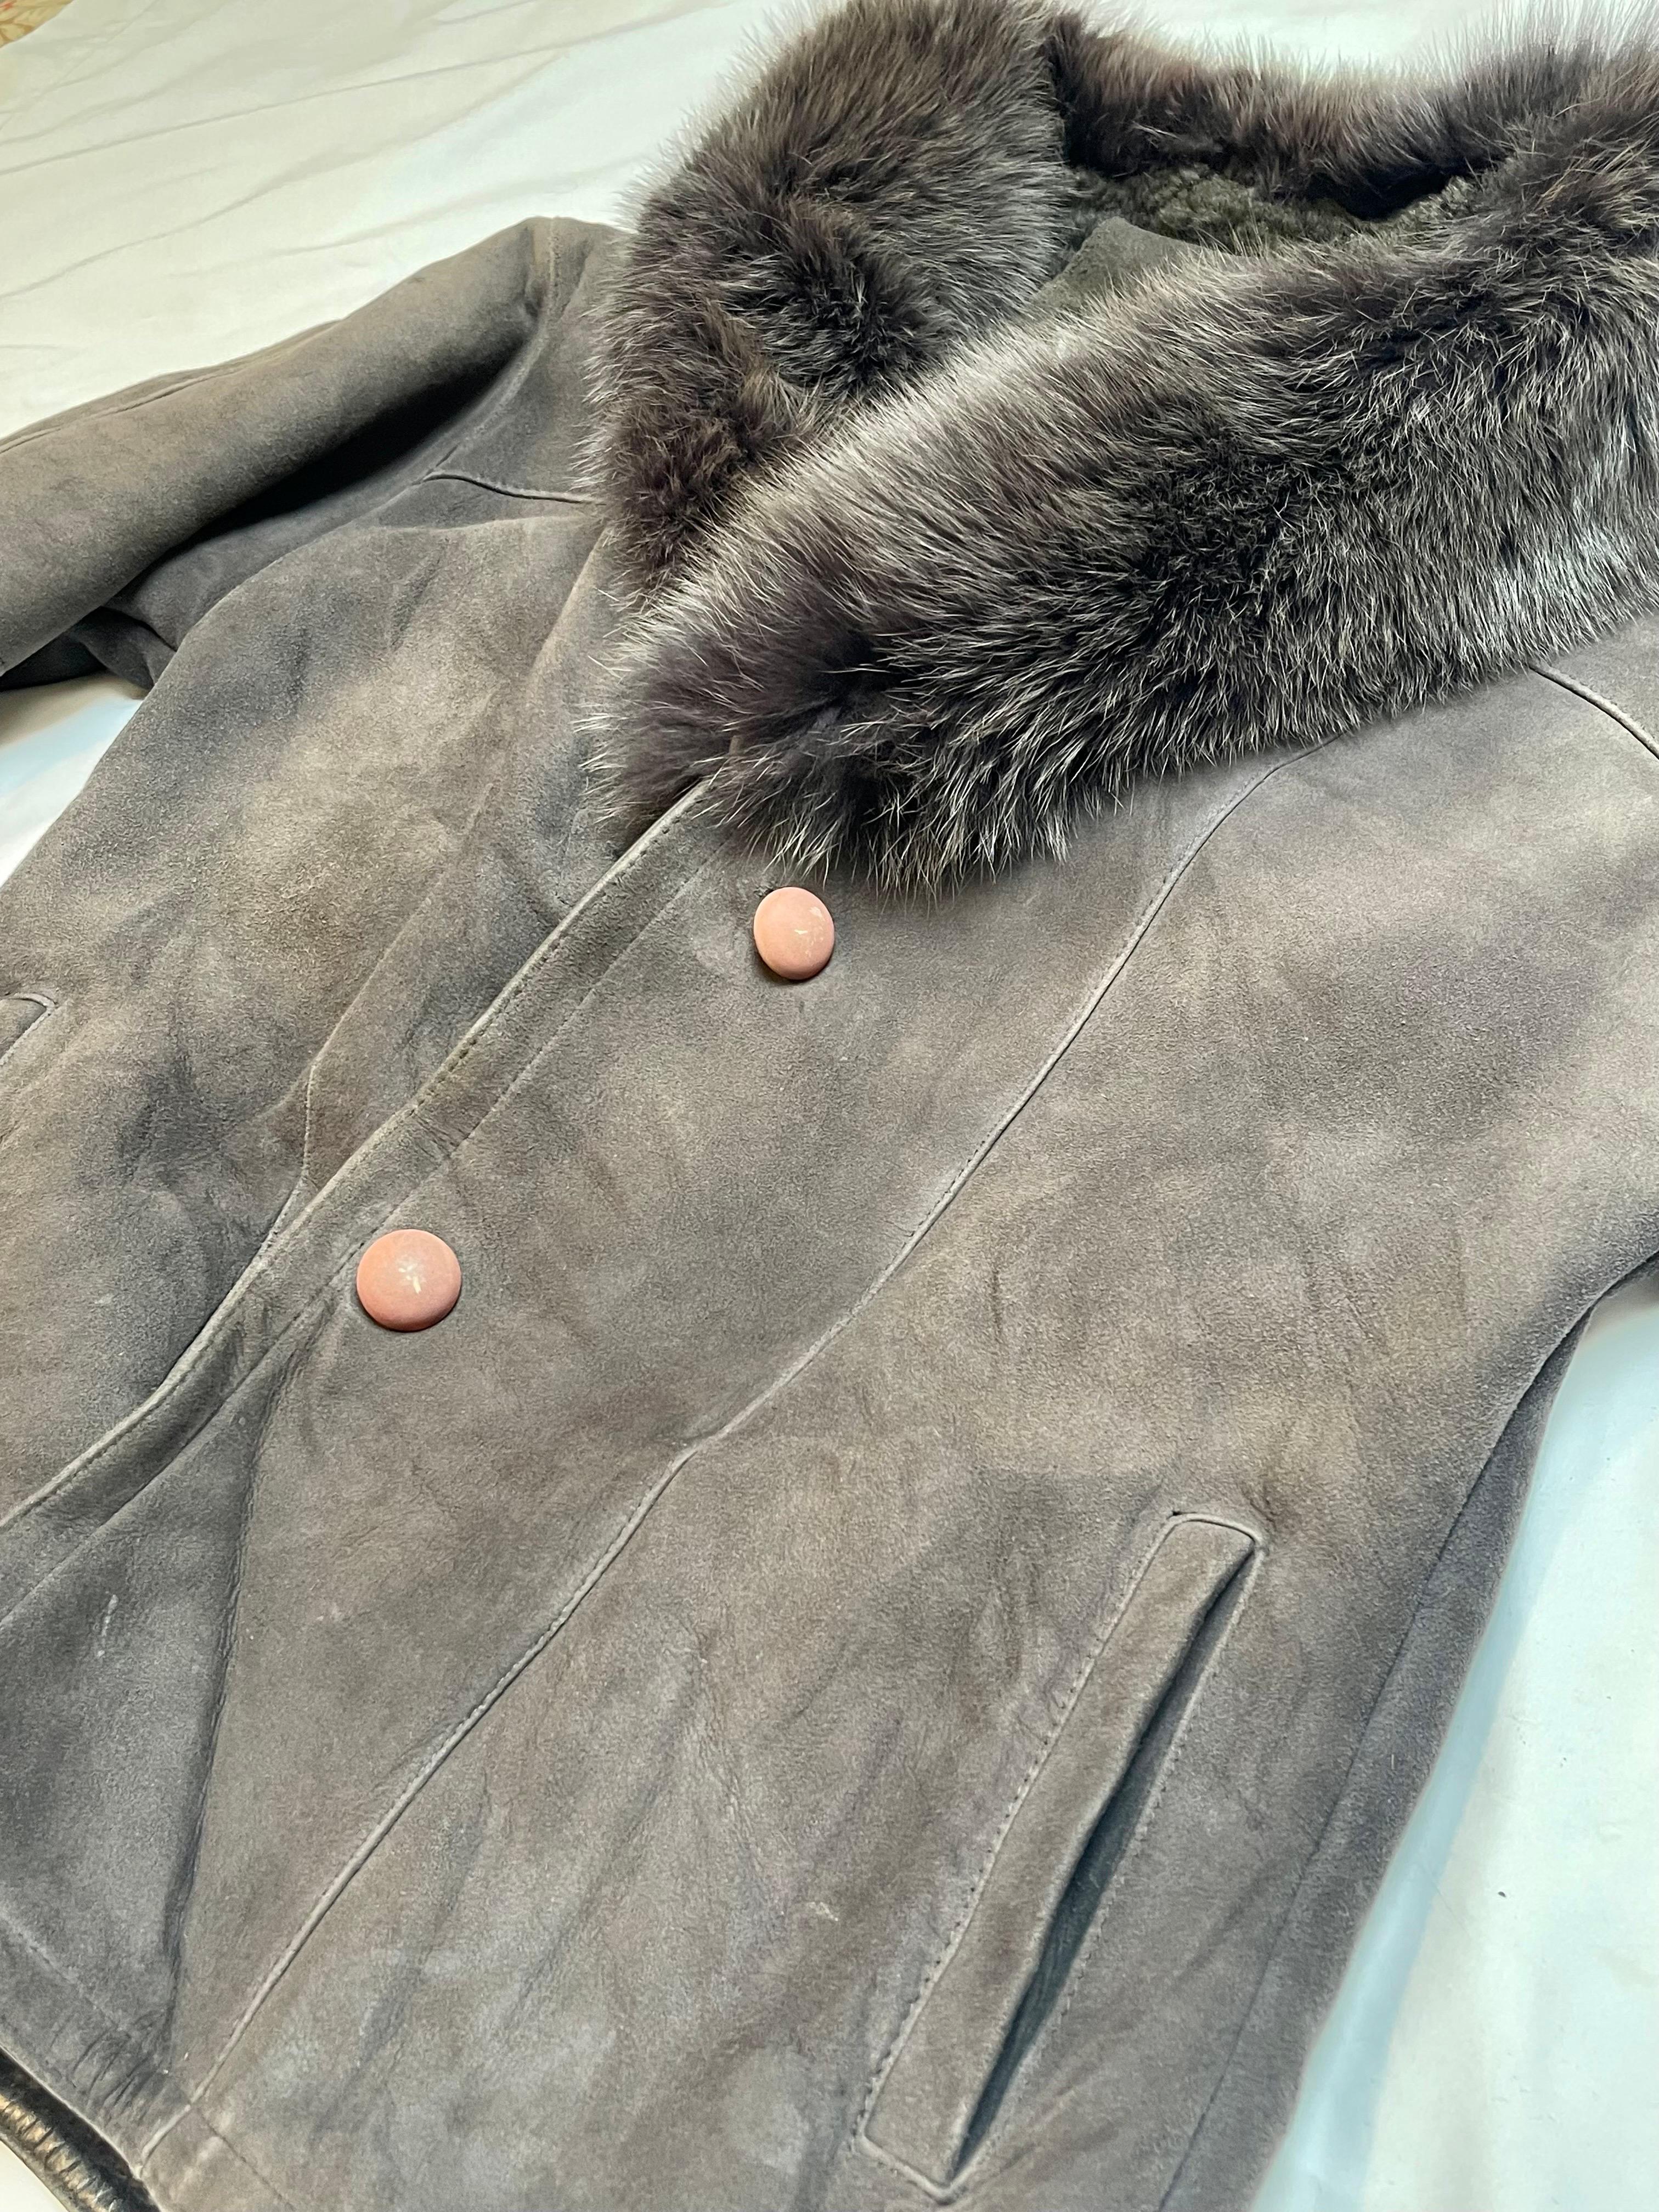   High Country Shearling Sheepskin Coat excellent condition Real Fur 2